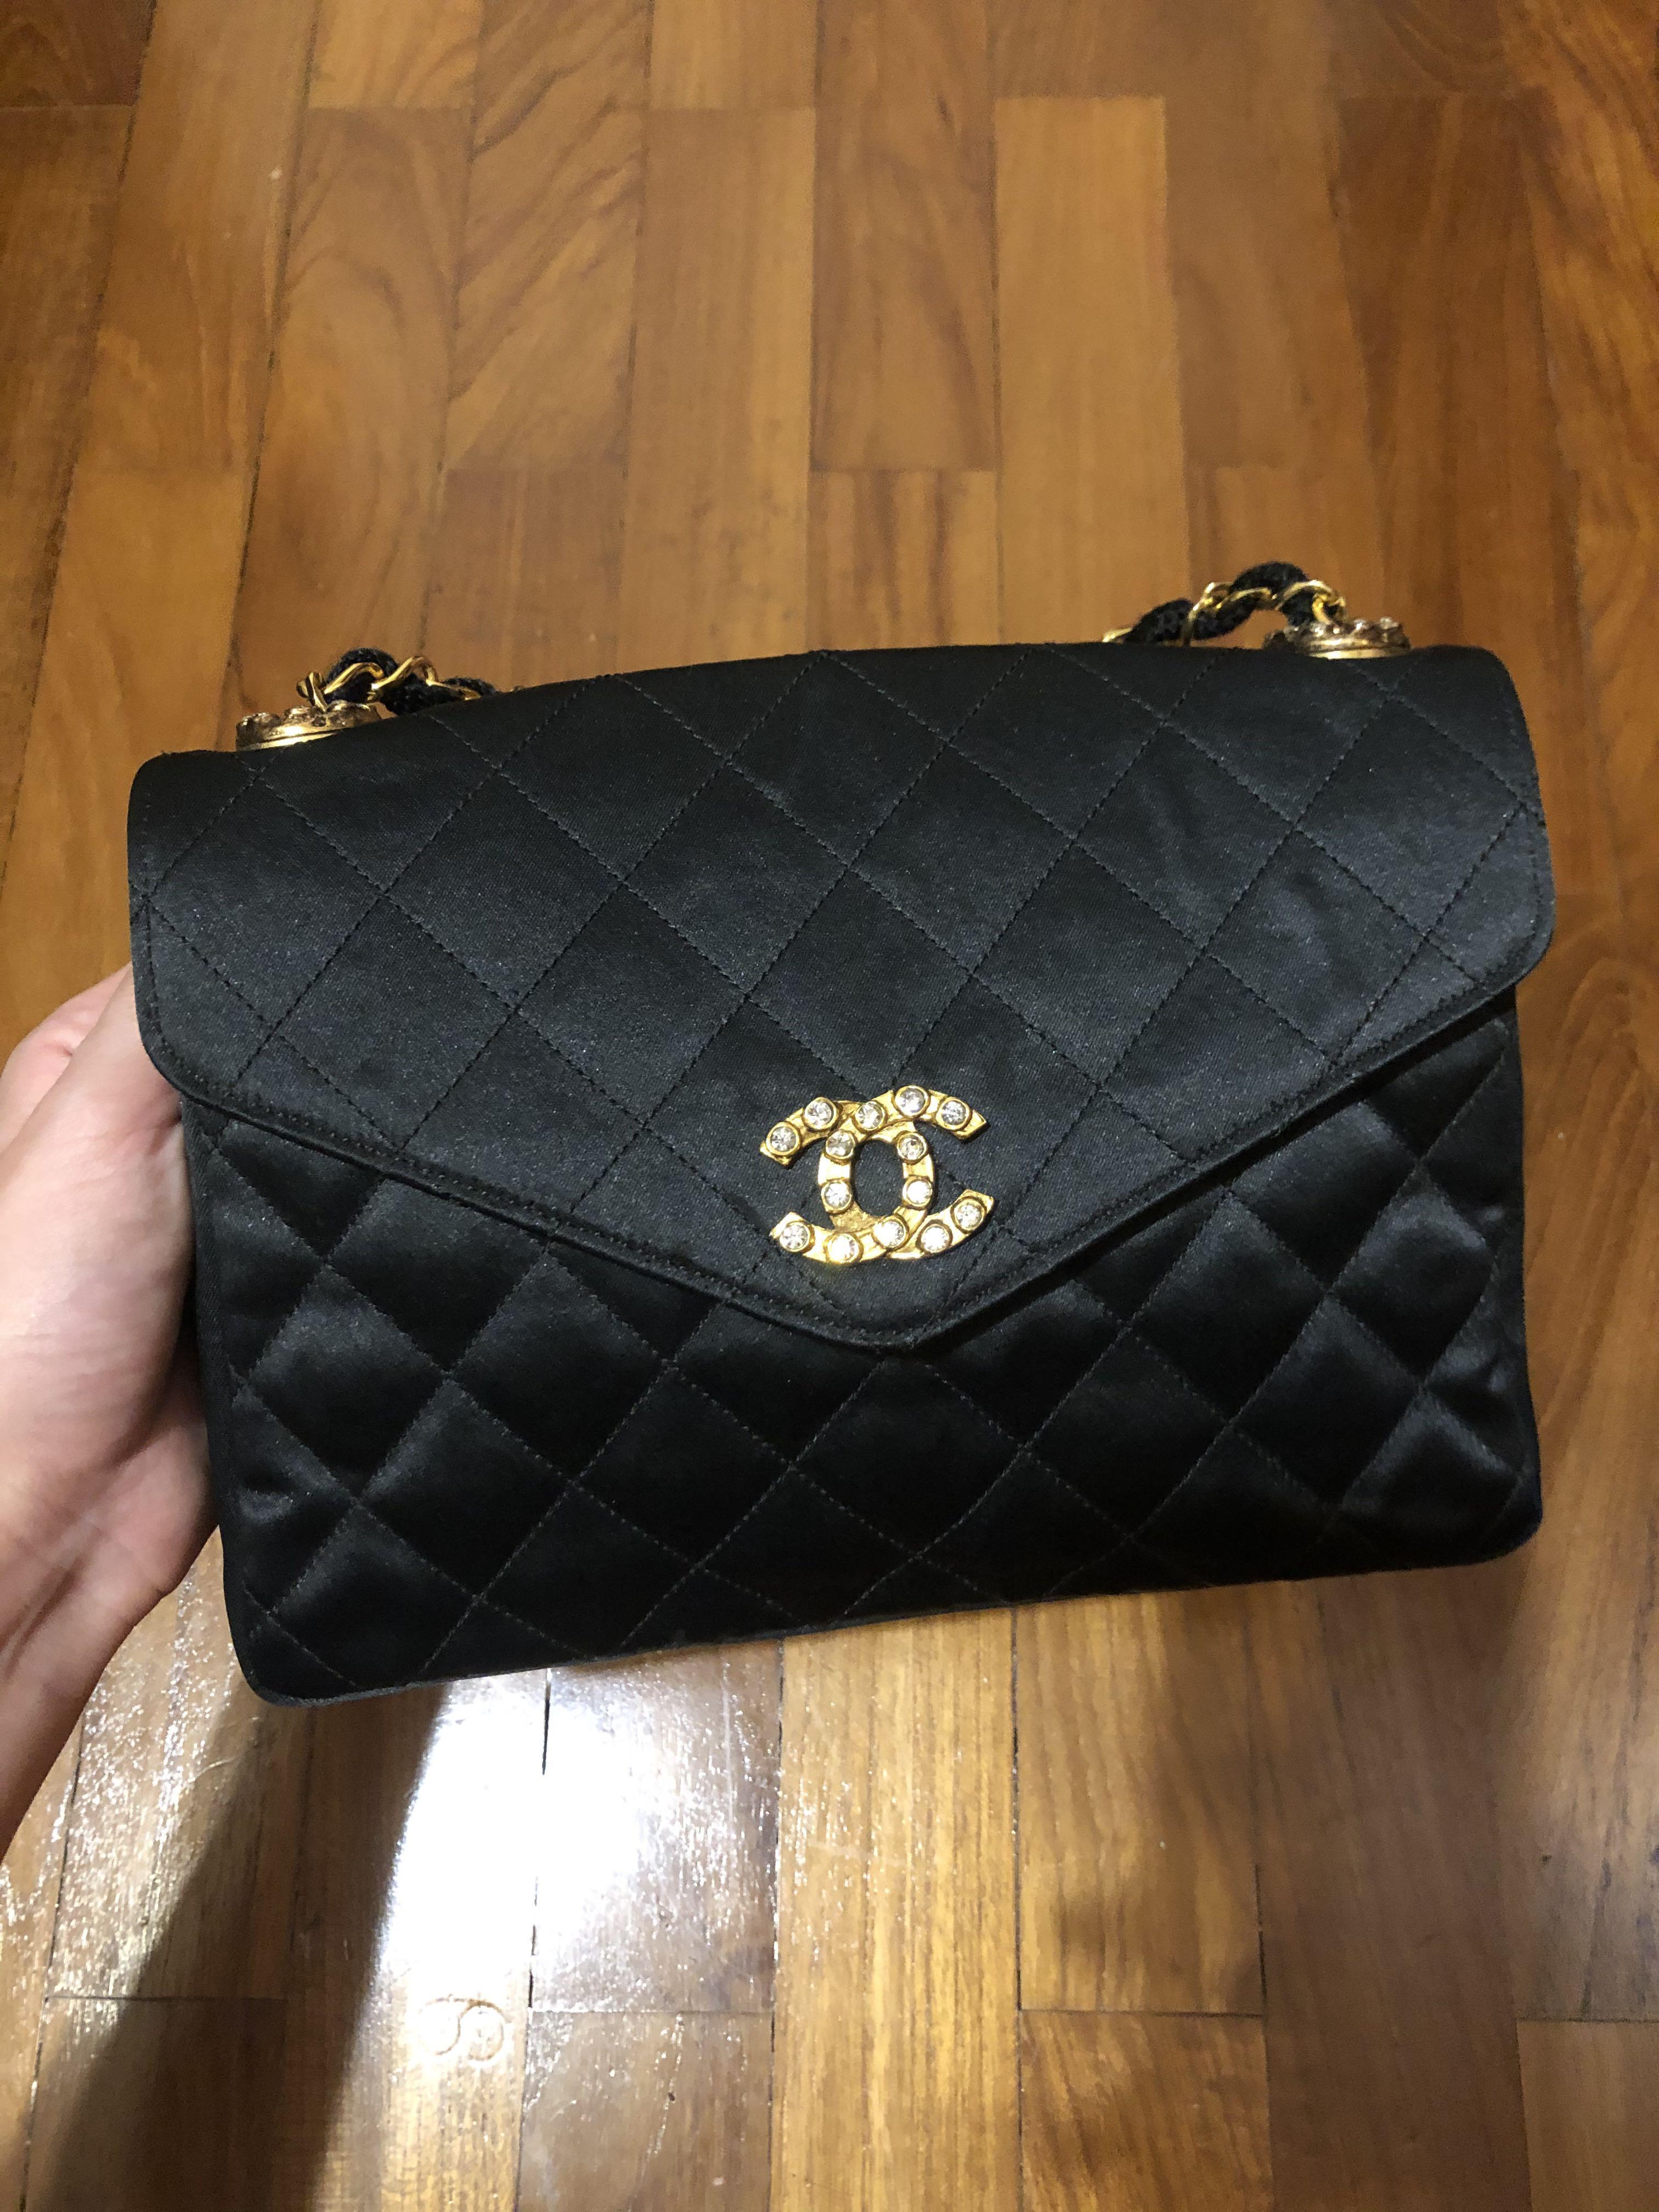 reserved* Chanel Crystal Encrusted CC Logo Vintage Flap, Women's